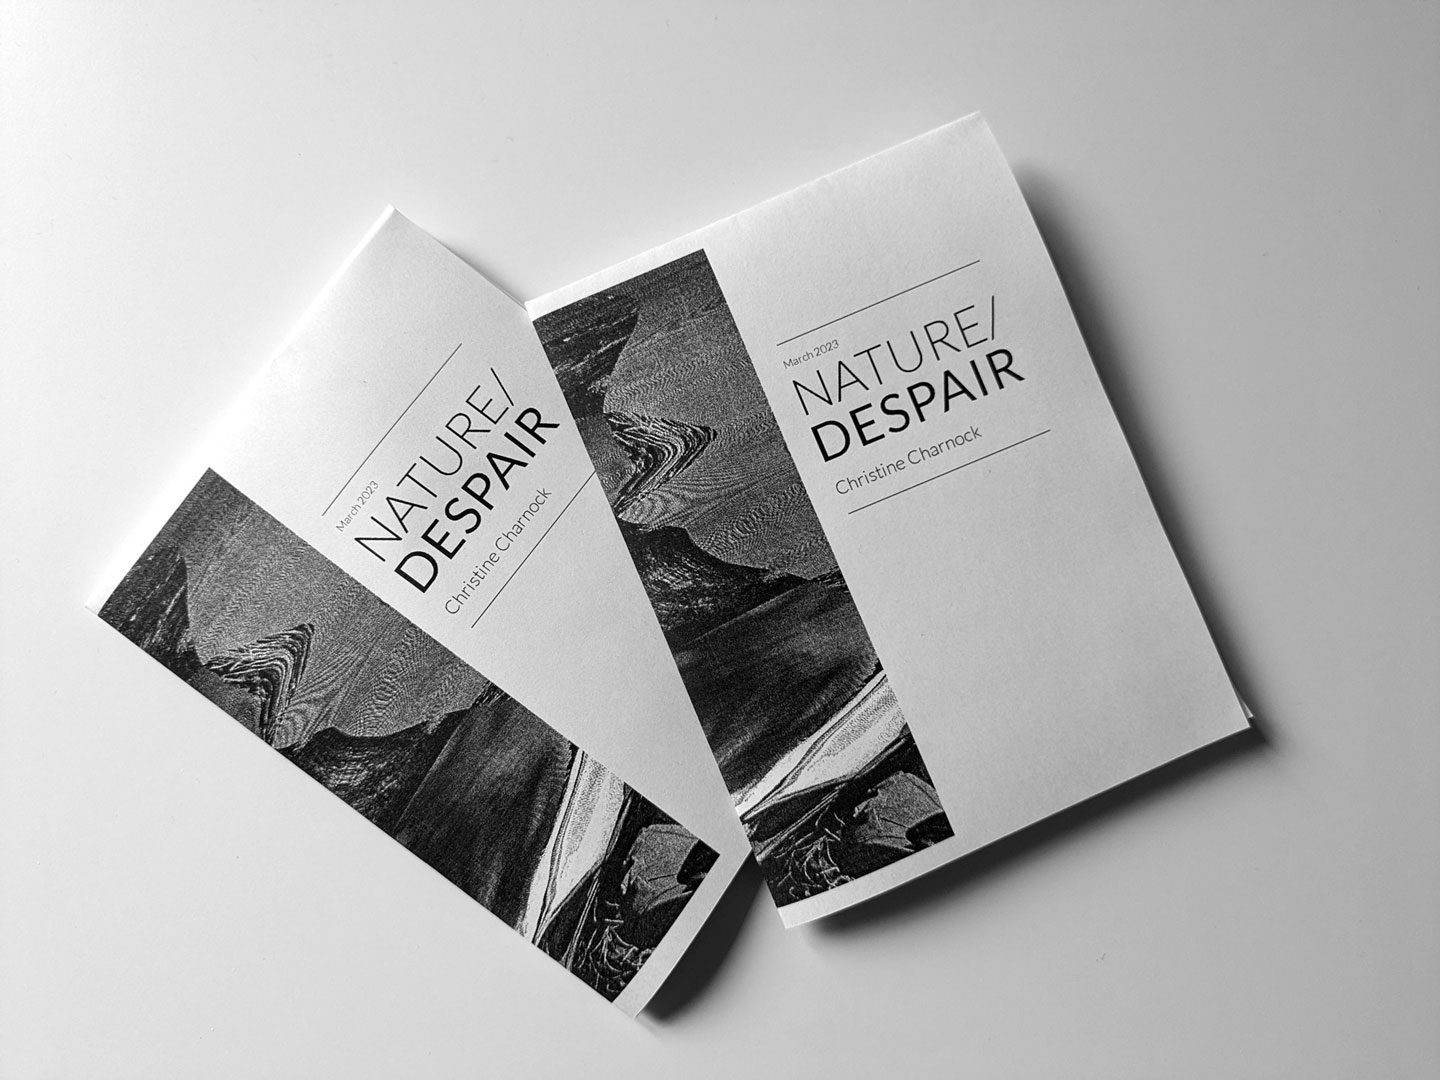 A photo of two exhibition catalogues stacked on top of each other. The front cover of the catalogues showcase a warped scanograph to the left, with the text 'Nature/Despair' displayed prominently in a sans serif font on the right. The catalogues are printed in black-and-white. 